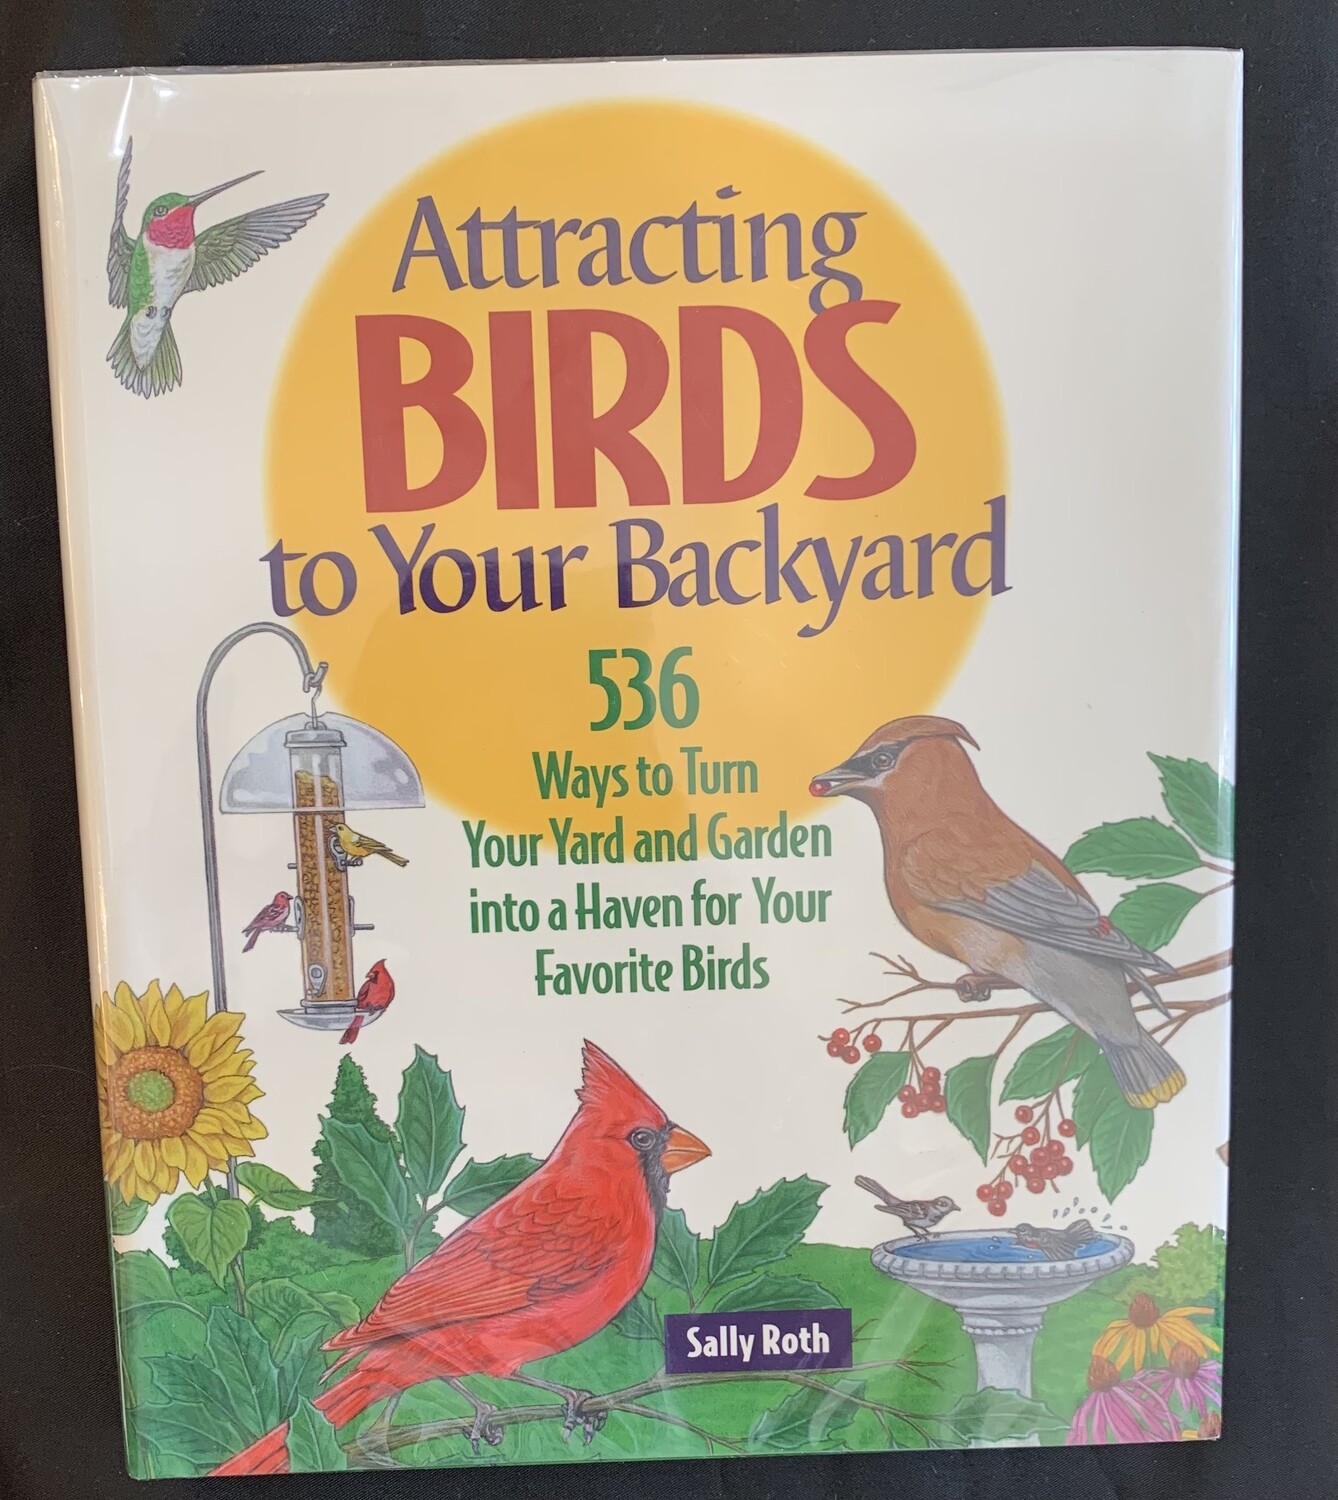 Attracting Birds To Your Backyard by Sally Roth